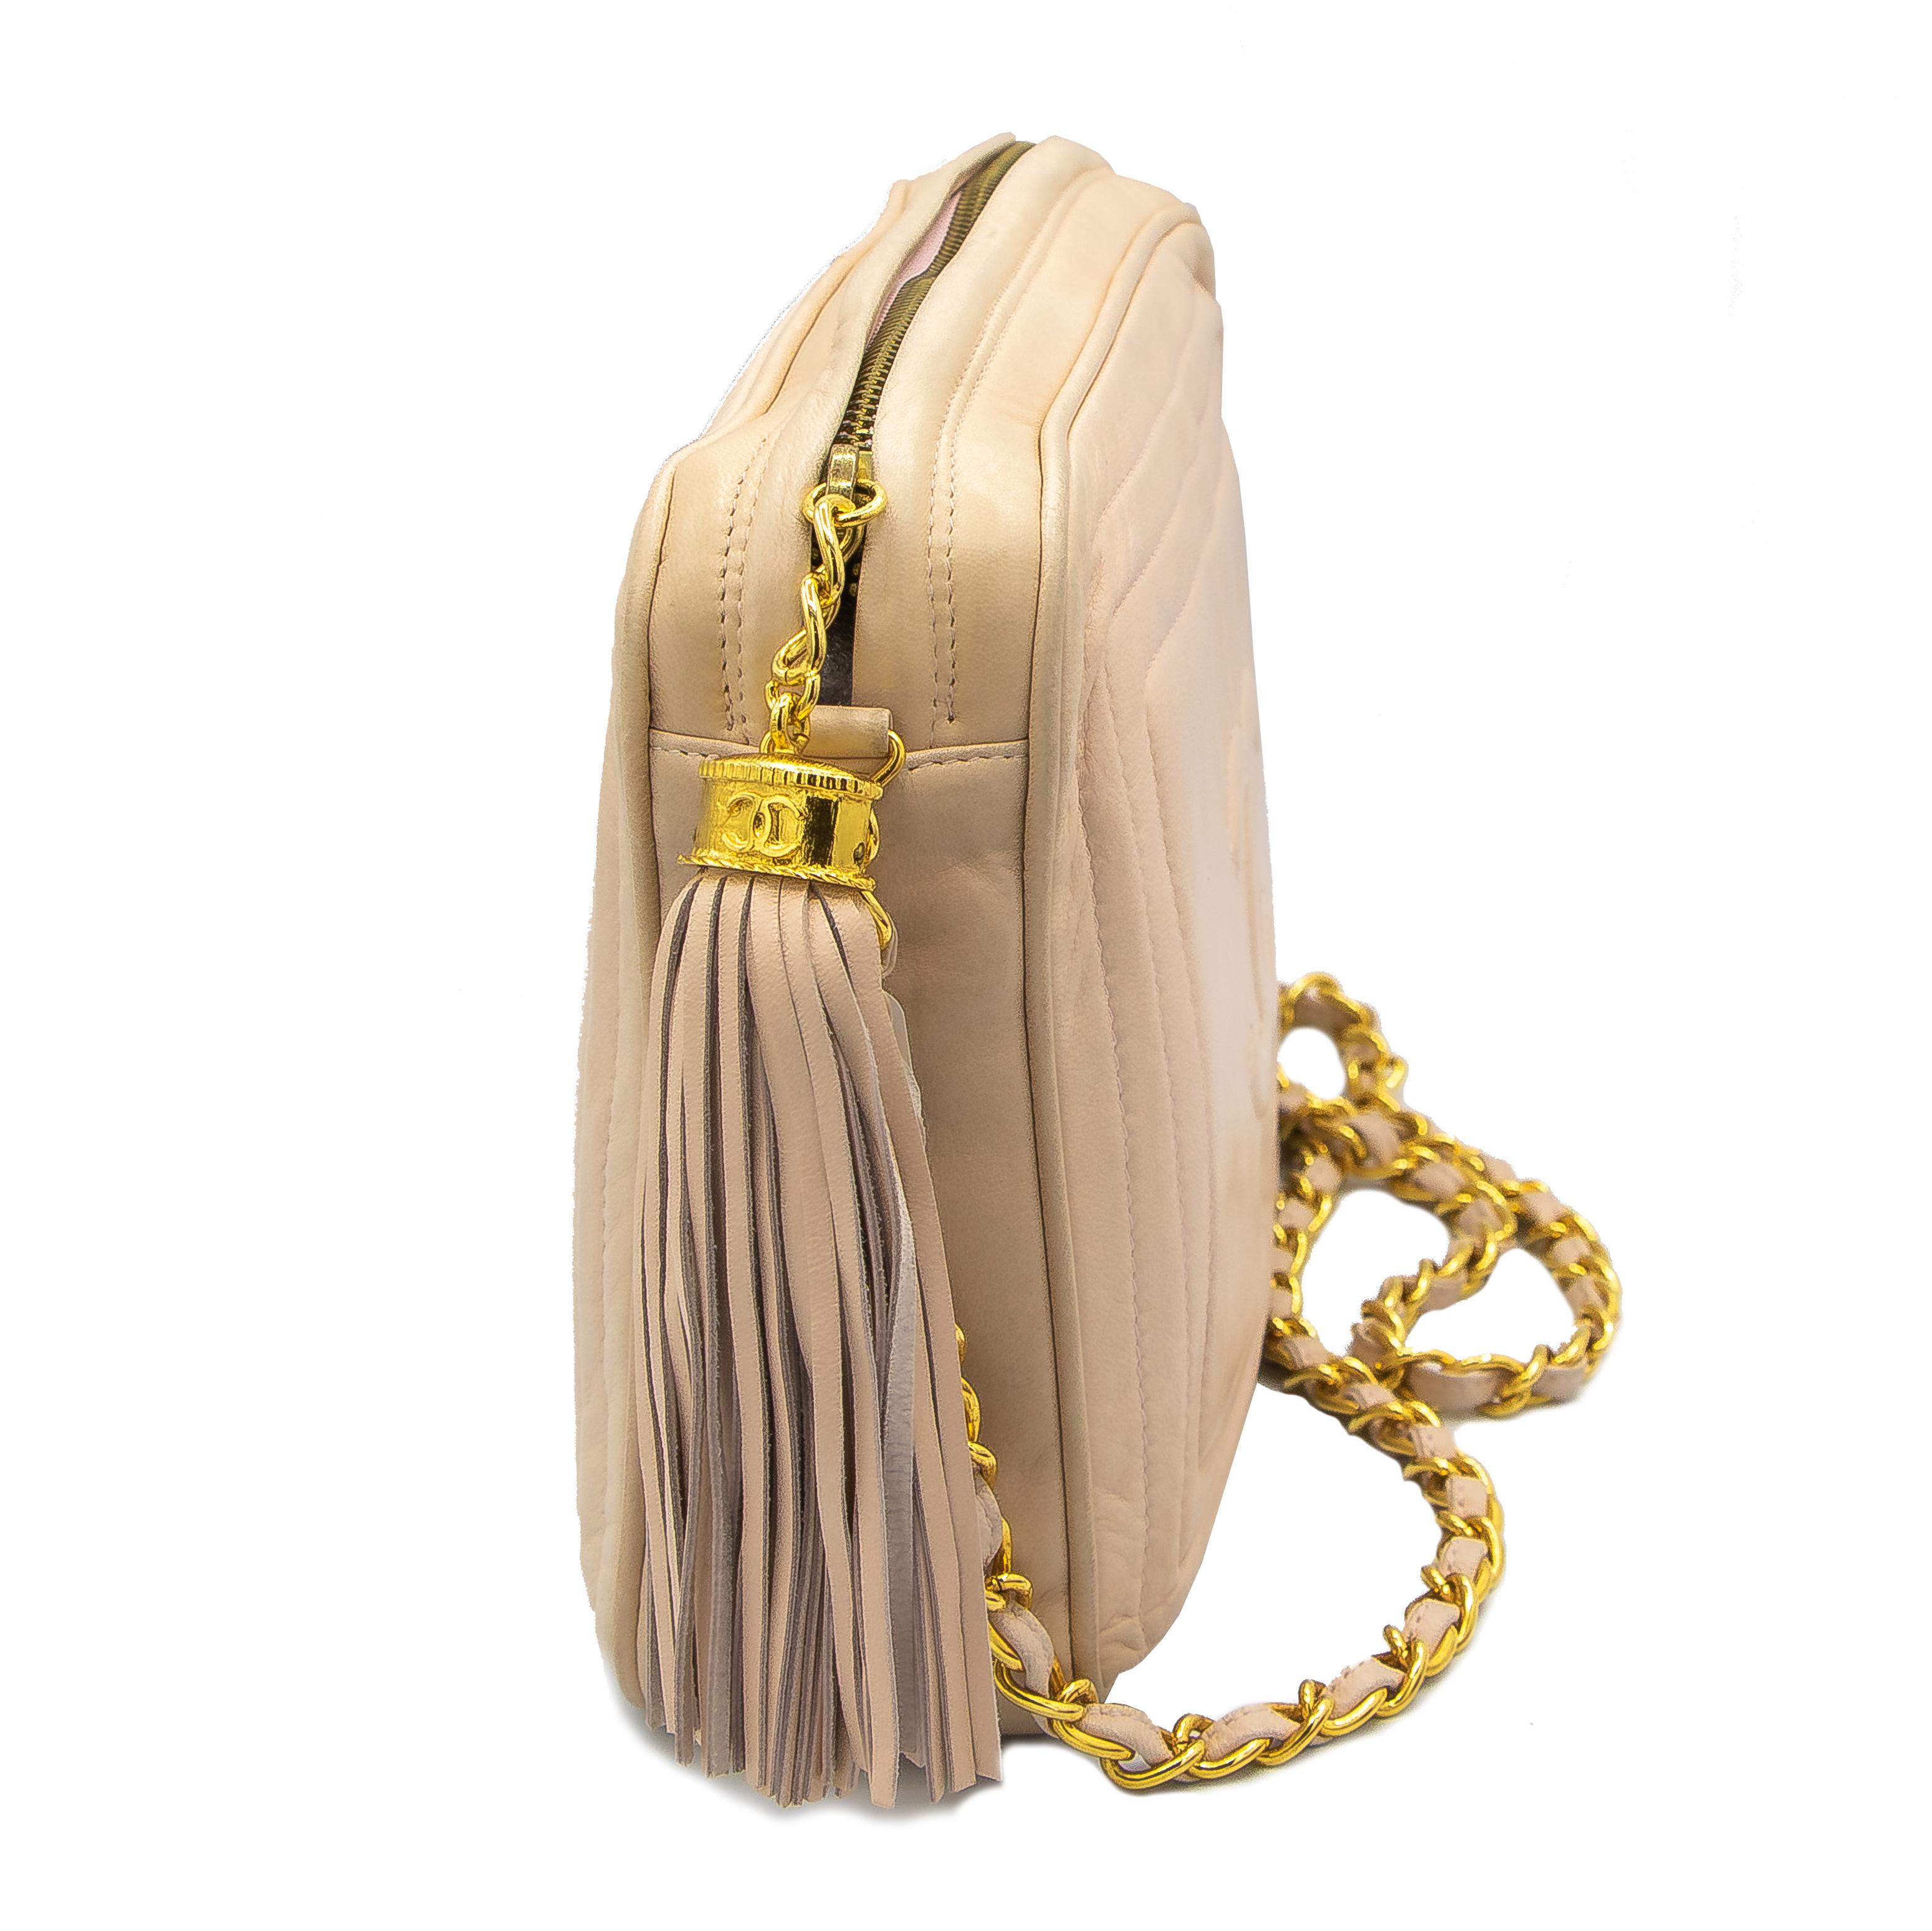 Beautiful Crossbody Chanel bag with one main pouch and a small zippered section. Yellow gold colored hardware, and a yellow gold colored chain with matching leather woven between it. The main zipper has a Coco Chanel tassel with nude leather. Signed